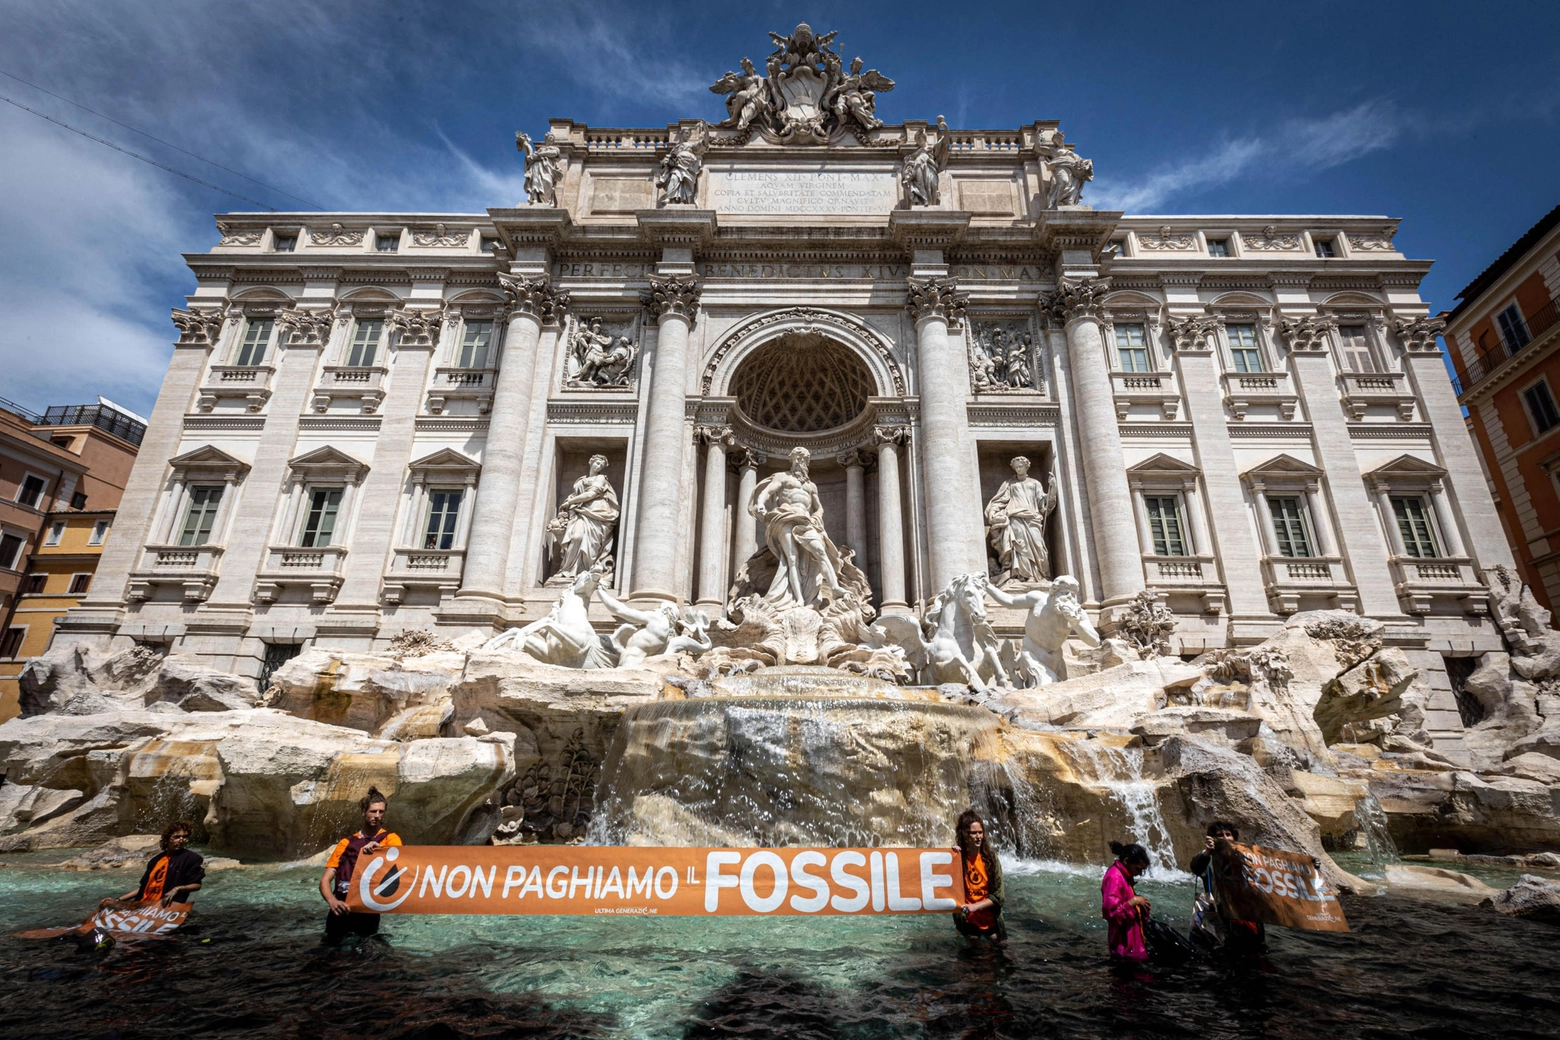 Climate activists from the group 'Last Generation' stand inside the Trevi Fountain in Rome, Italy, 21 May 2023. About a dozen activists, who recalled the emergency in the Italian region of Emilia-Romagna, where about 30,000 people have been displaced after heavy floods in recent days, threw a black liquid, vegetable charcoal, into the famed Trevi fountain with banners reading 'let's not pay for fossils' and shouting 'our country is dying'. Local police intervened on the spot.
ANSA/STRINGER